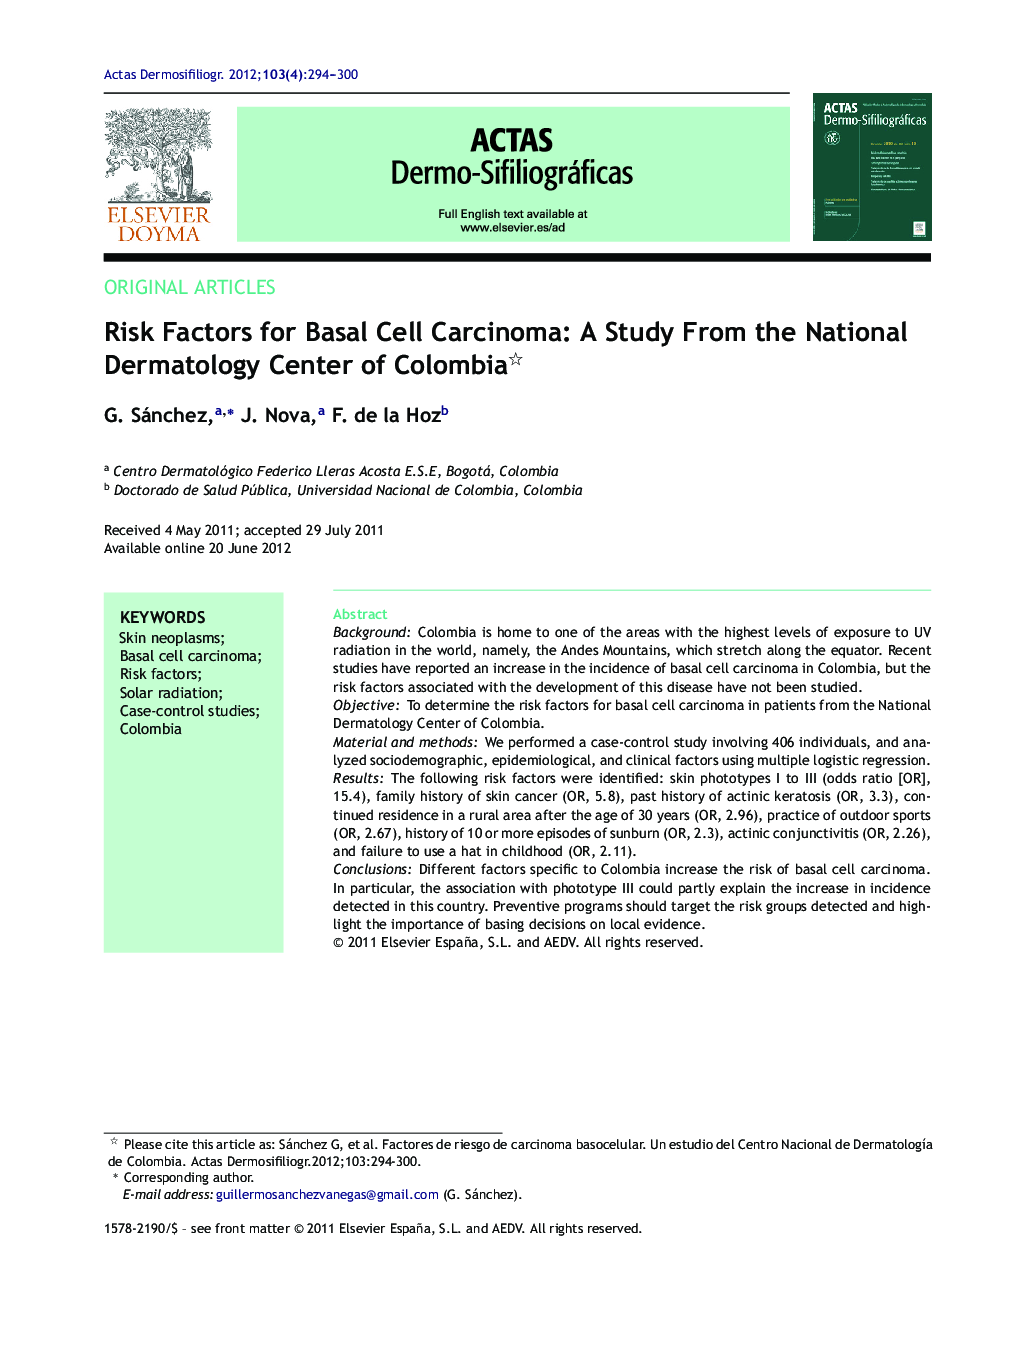 Risk Factors for Basal Cell Carcinoma: A Study From the National Dermatology Center of Colombia 